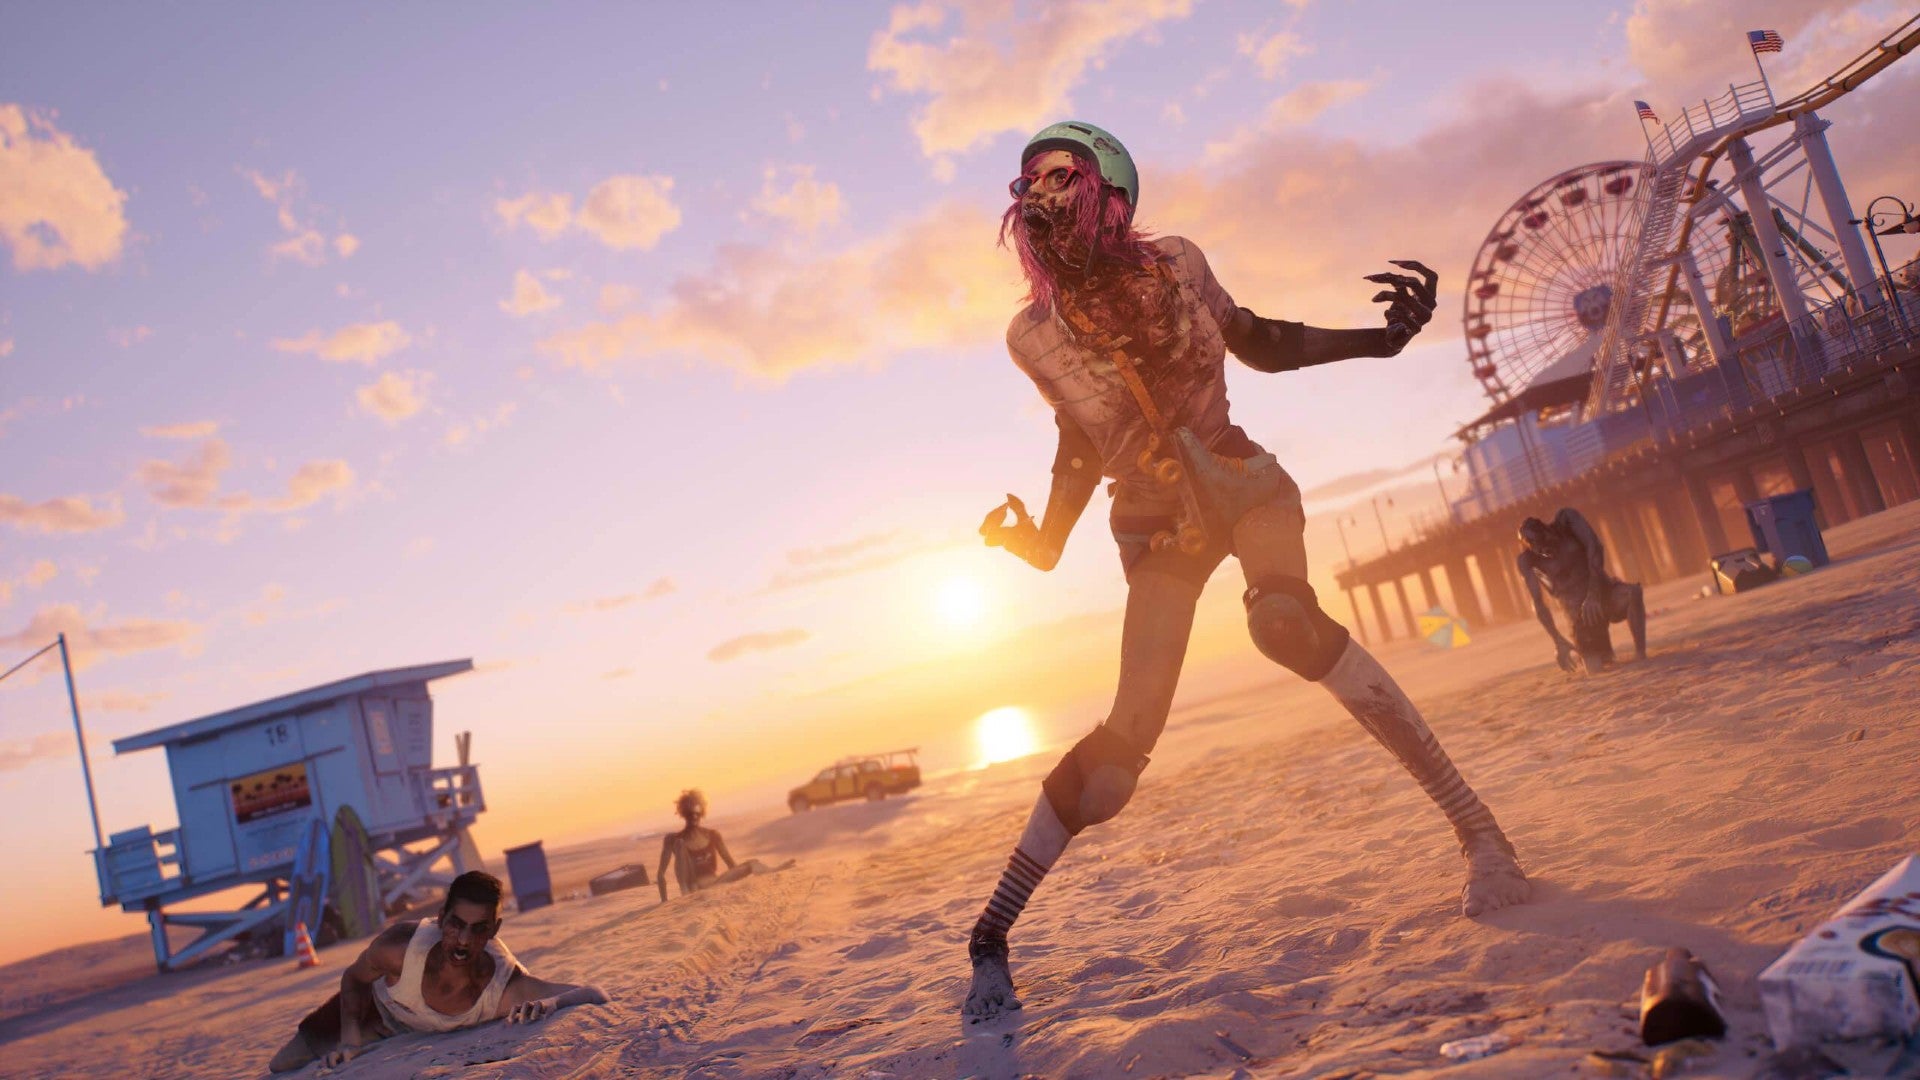 Dead Island 2 image showing zombies across a warmly lit beach, as the sun sets over the ocean in the background.